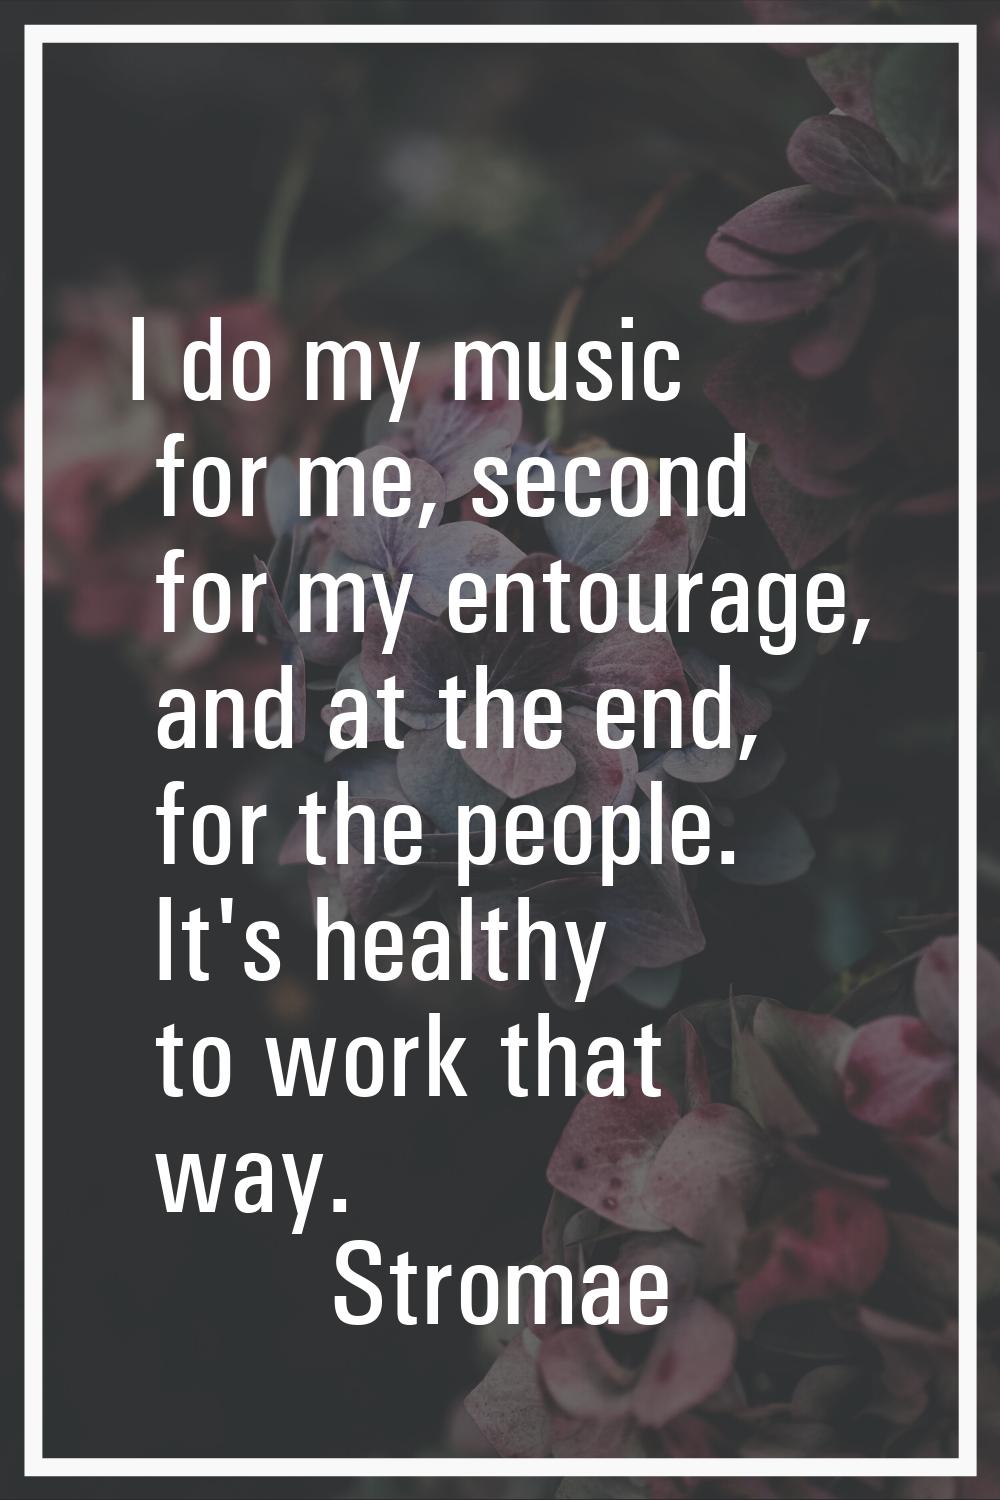 I do my music for me, second for my entourage, and at the end, for the people. It's healthy to work